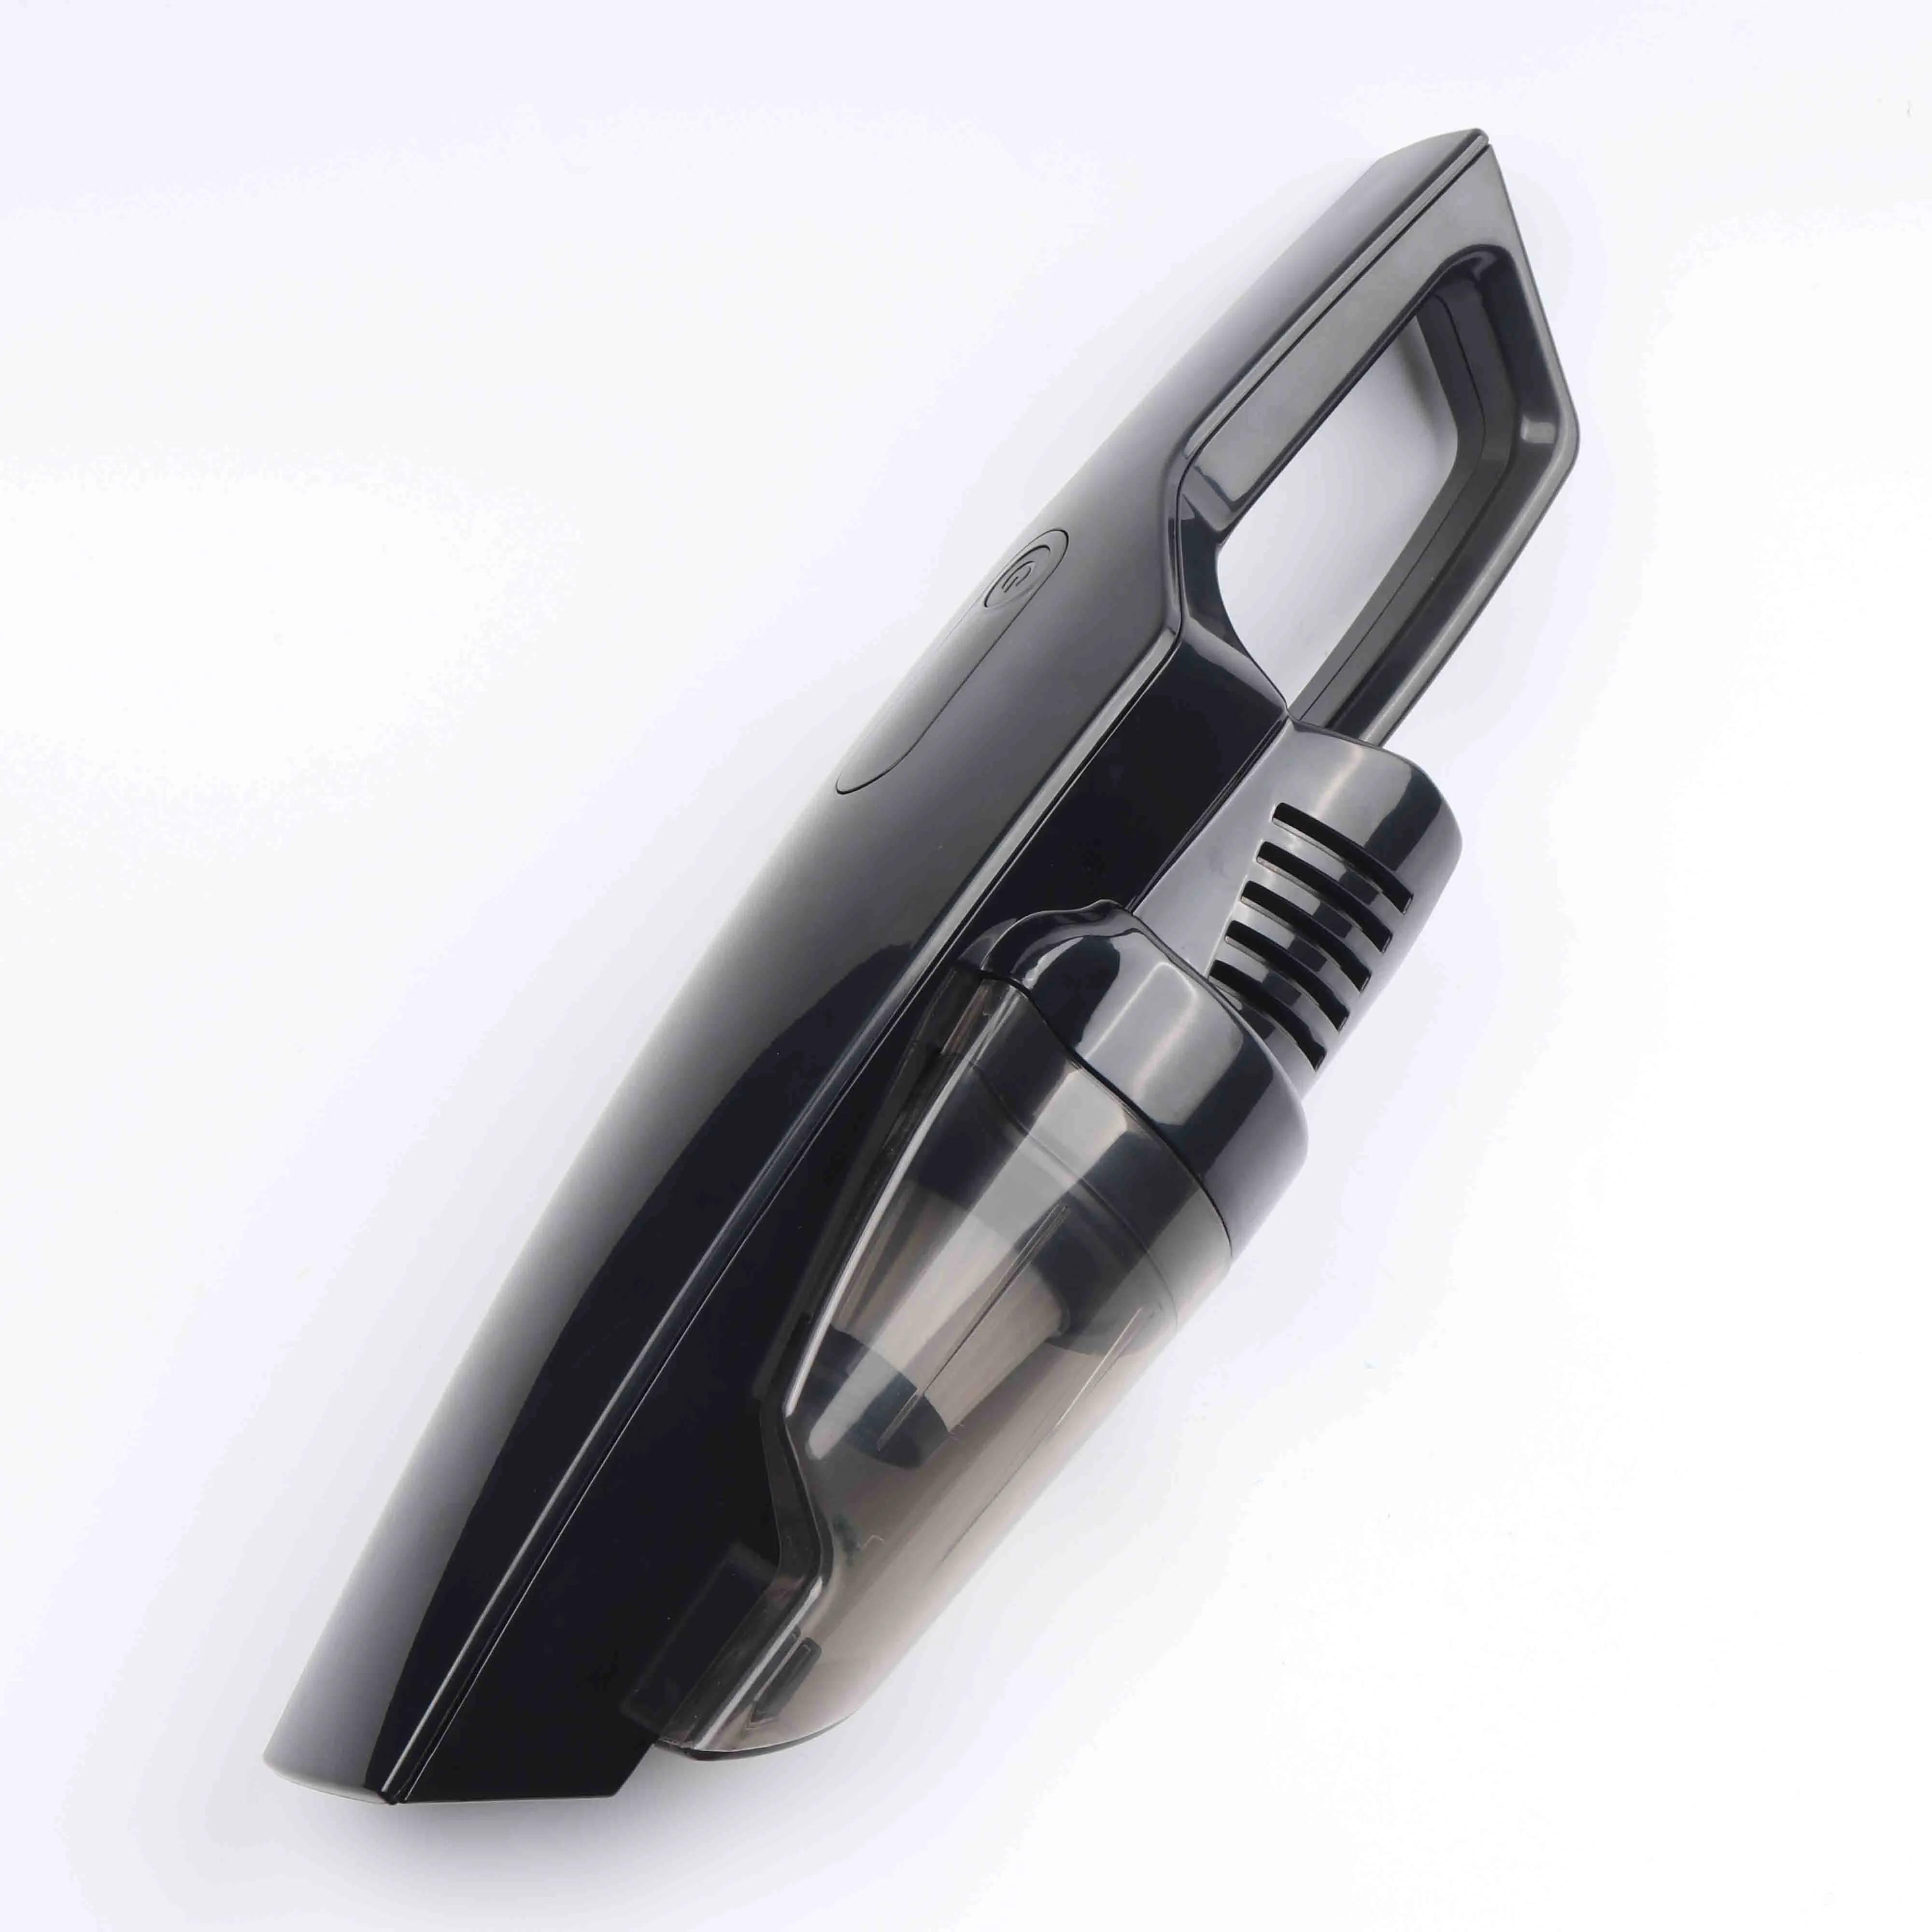 Best Price Handheld For Cleaning Car Vacuum Cleaner China